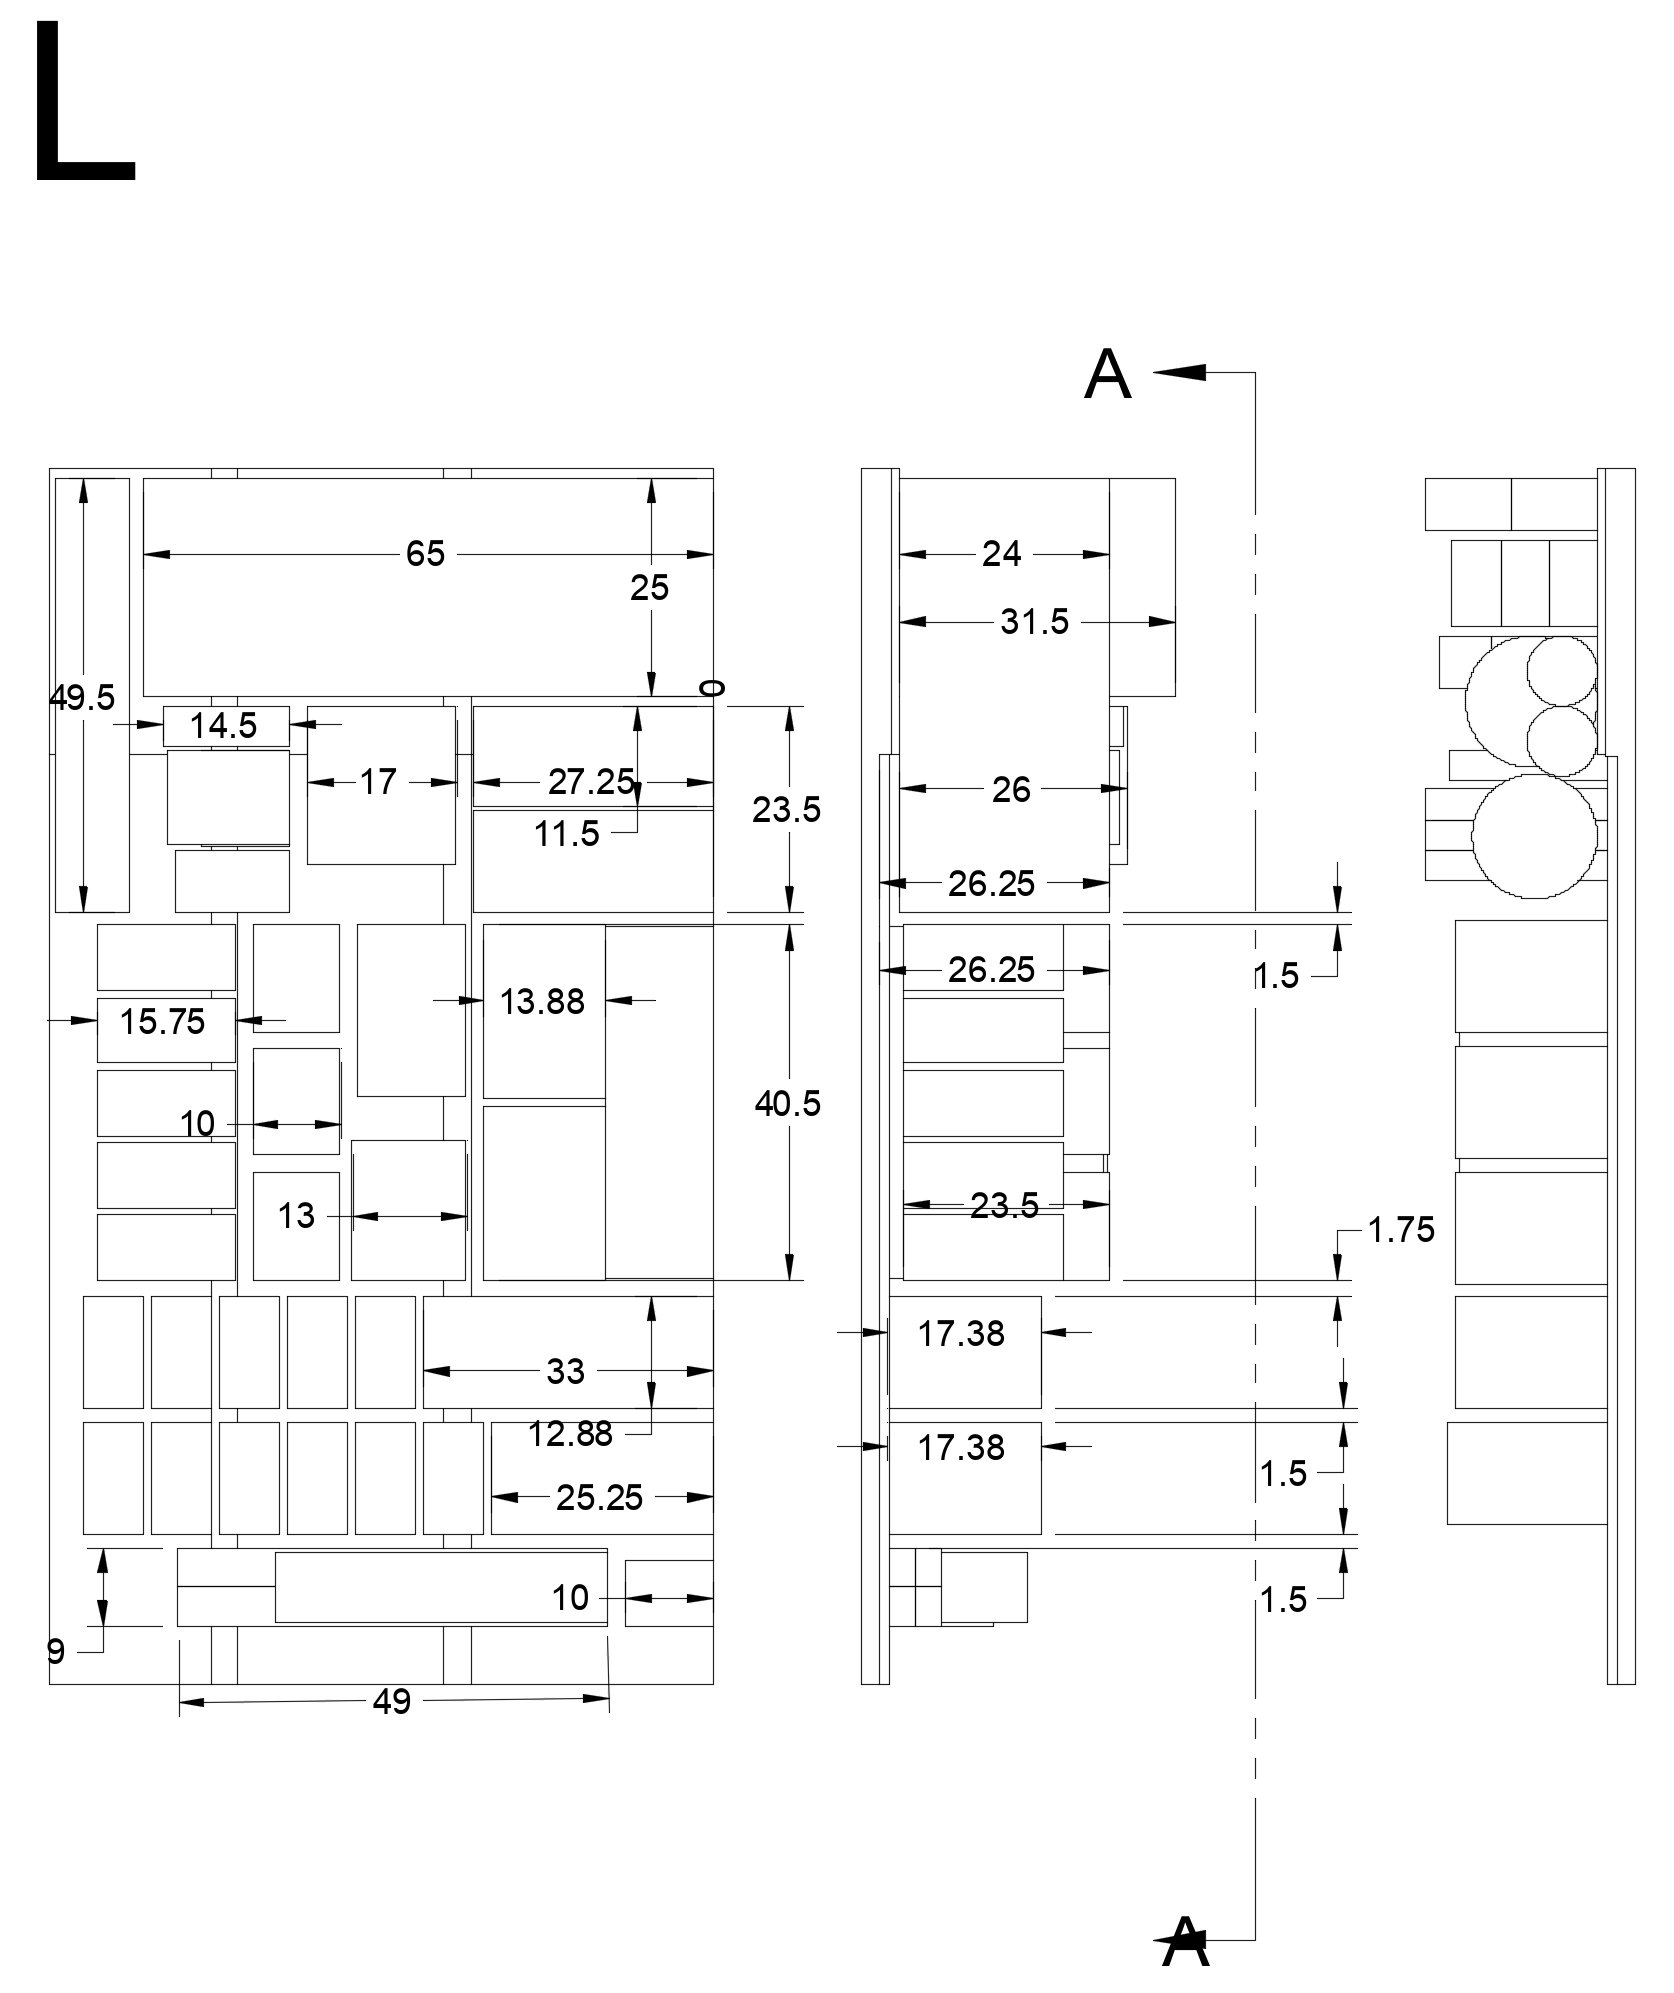 Shop drawings for the left side